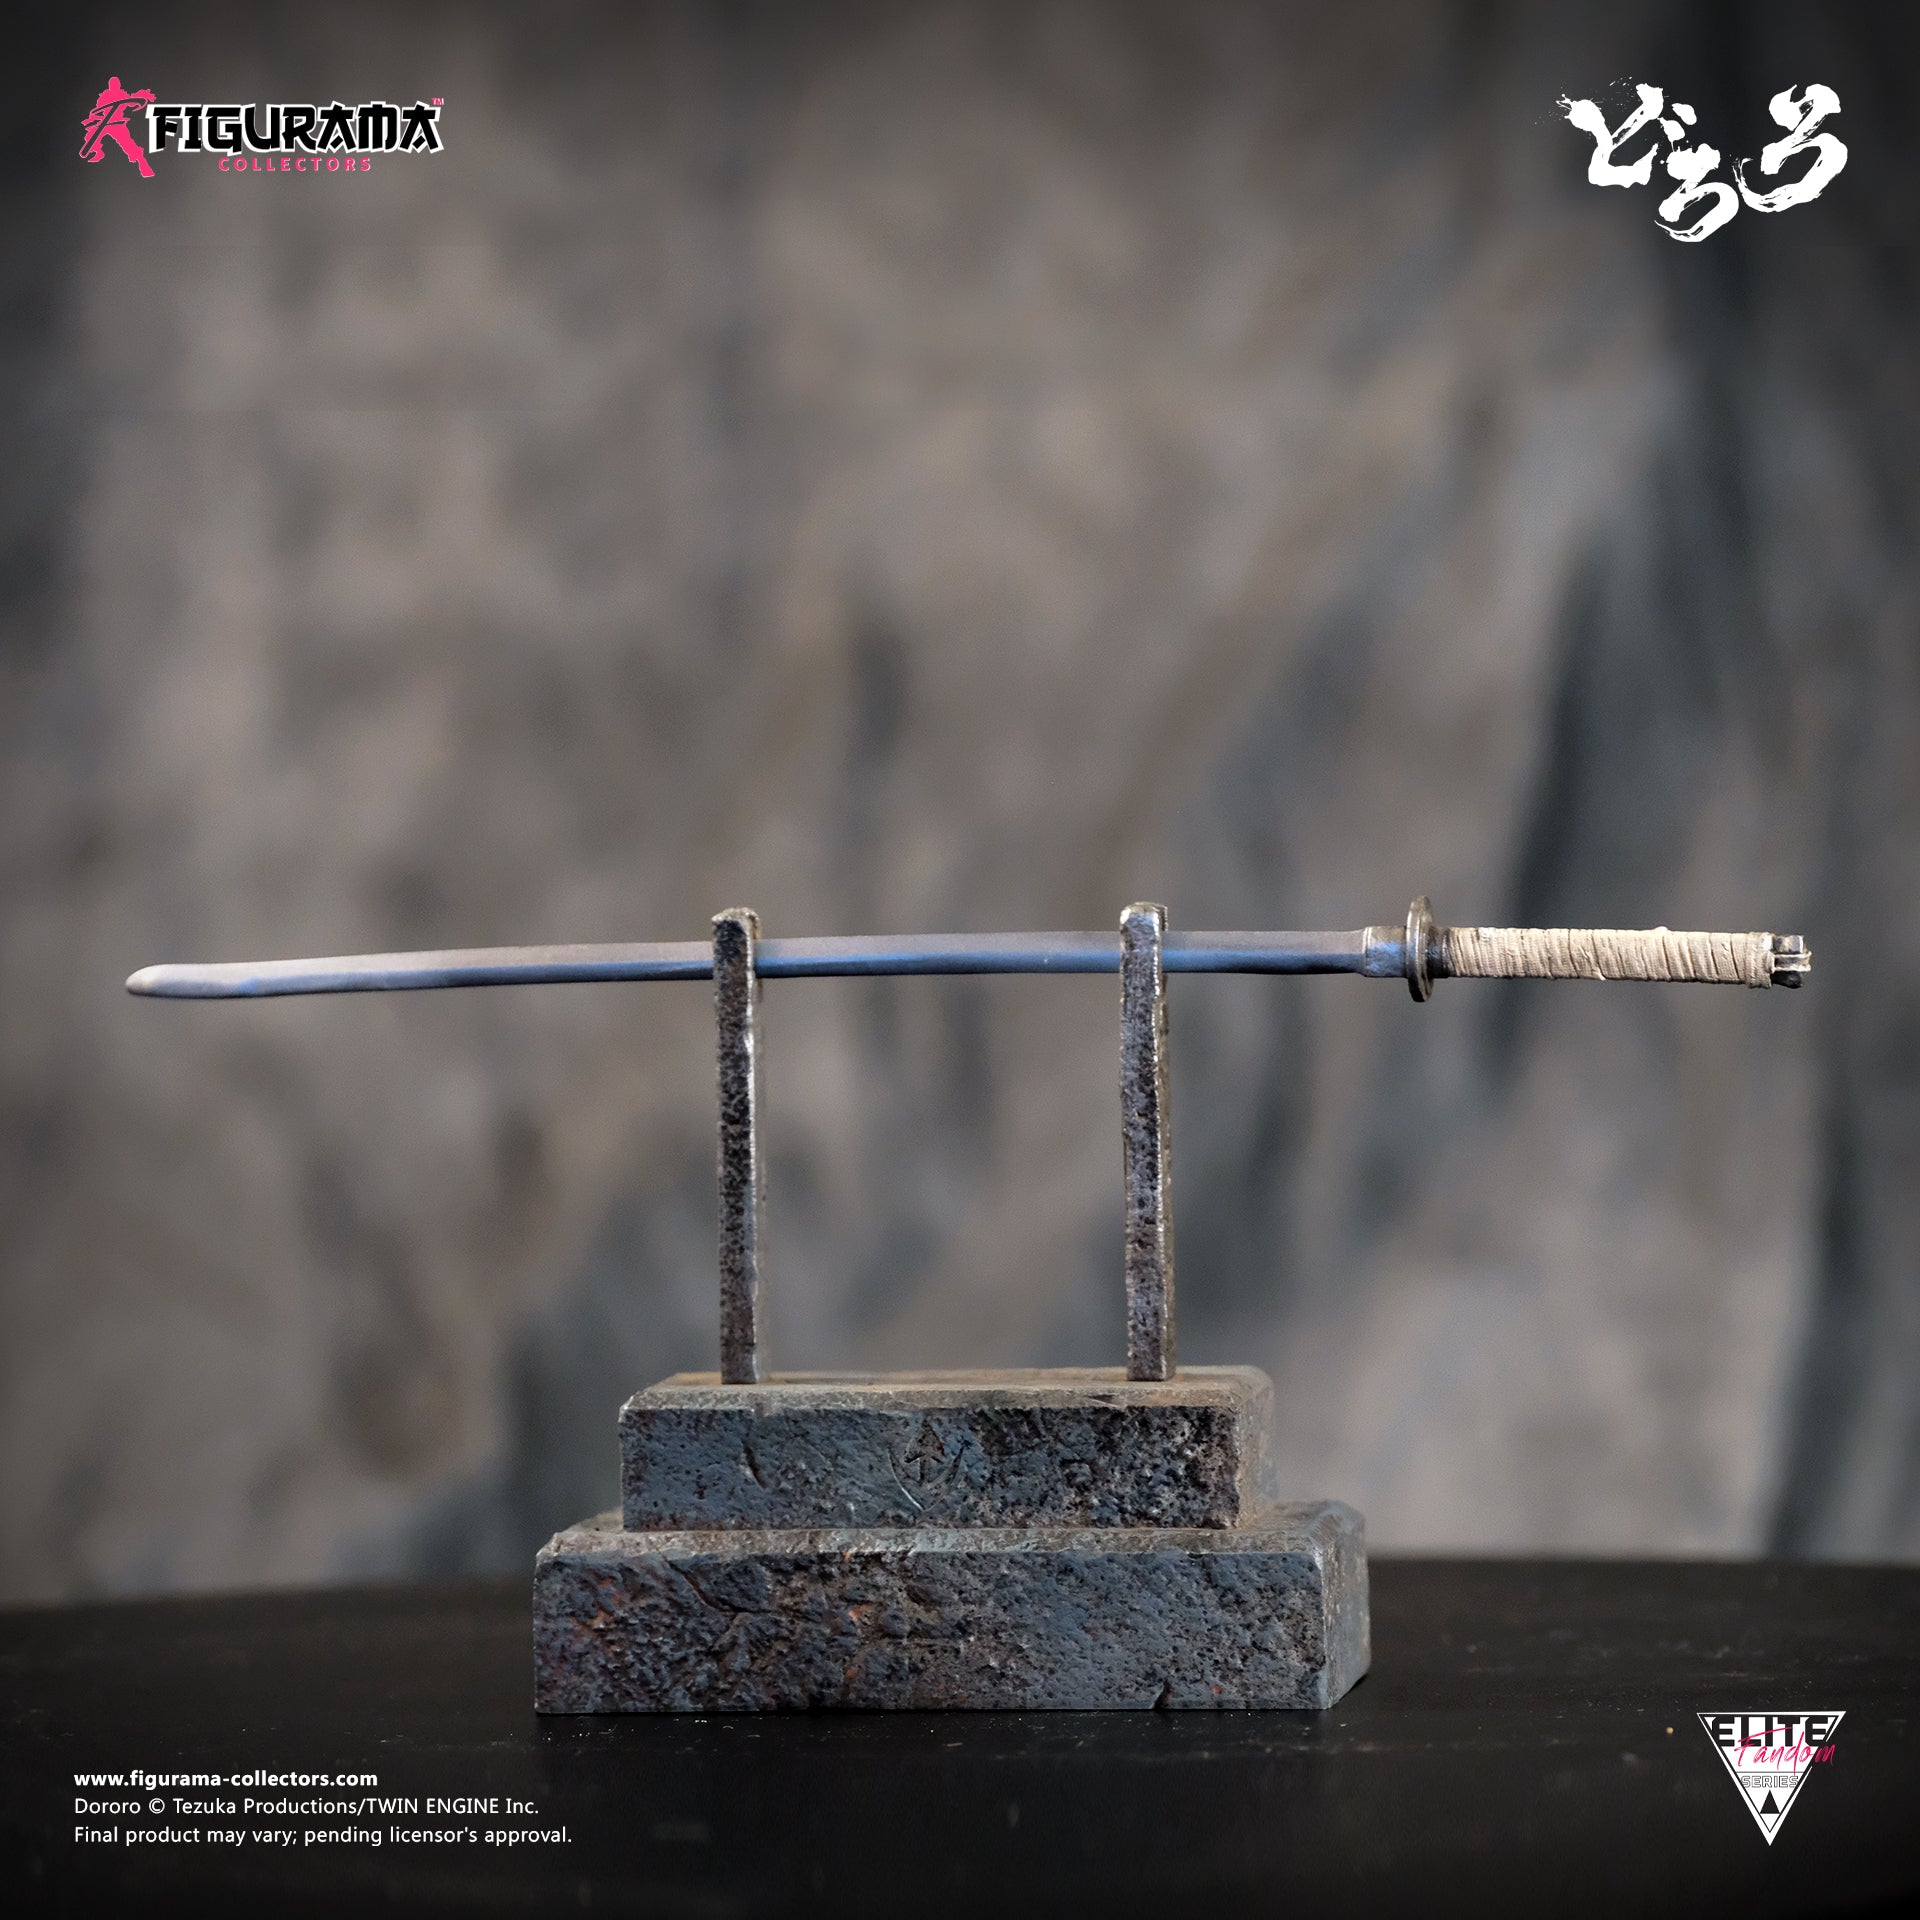 Figurama Collectors Reveal Promotional Video for the Upcoming Dororo Statue  - Anime Corner